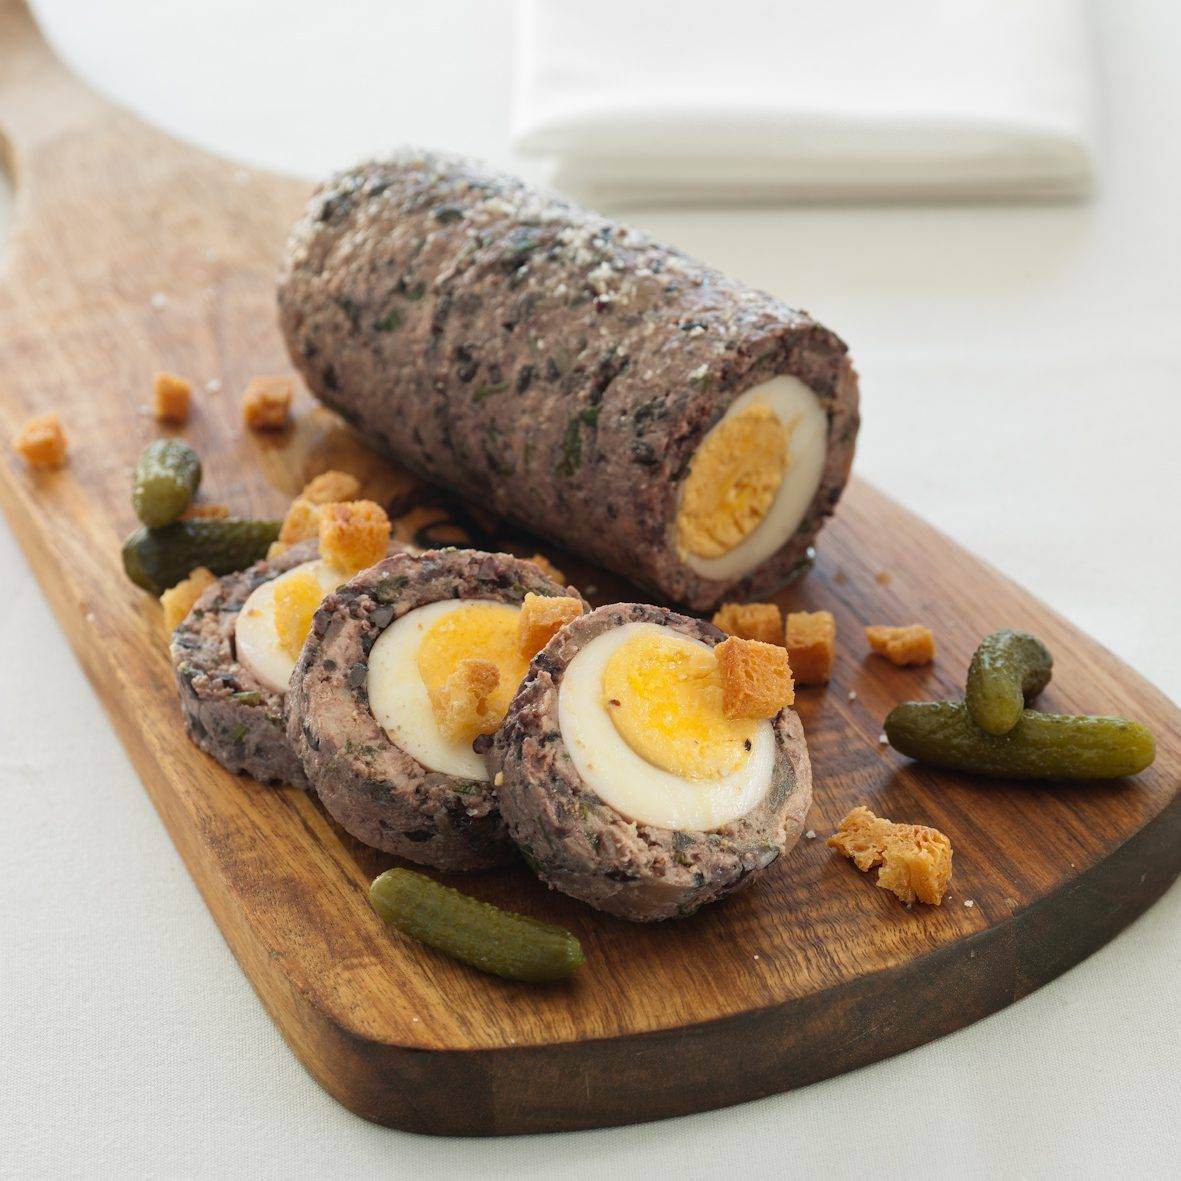 George Calombaris’ Egg Rolo with Garlic Croutons & Cornichons